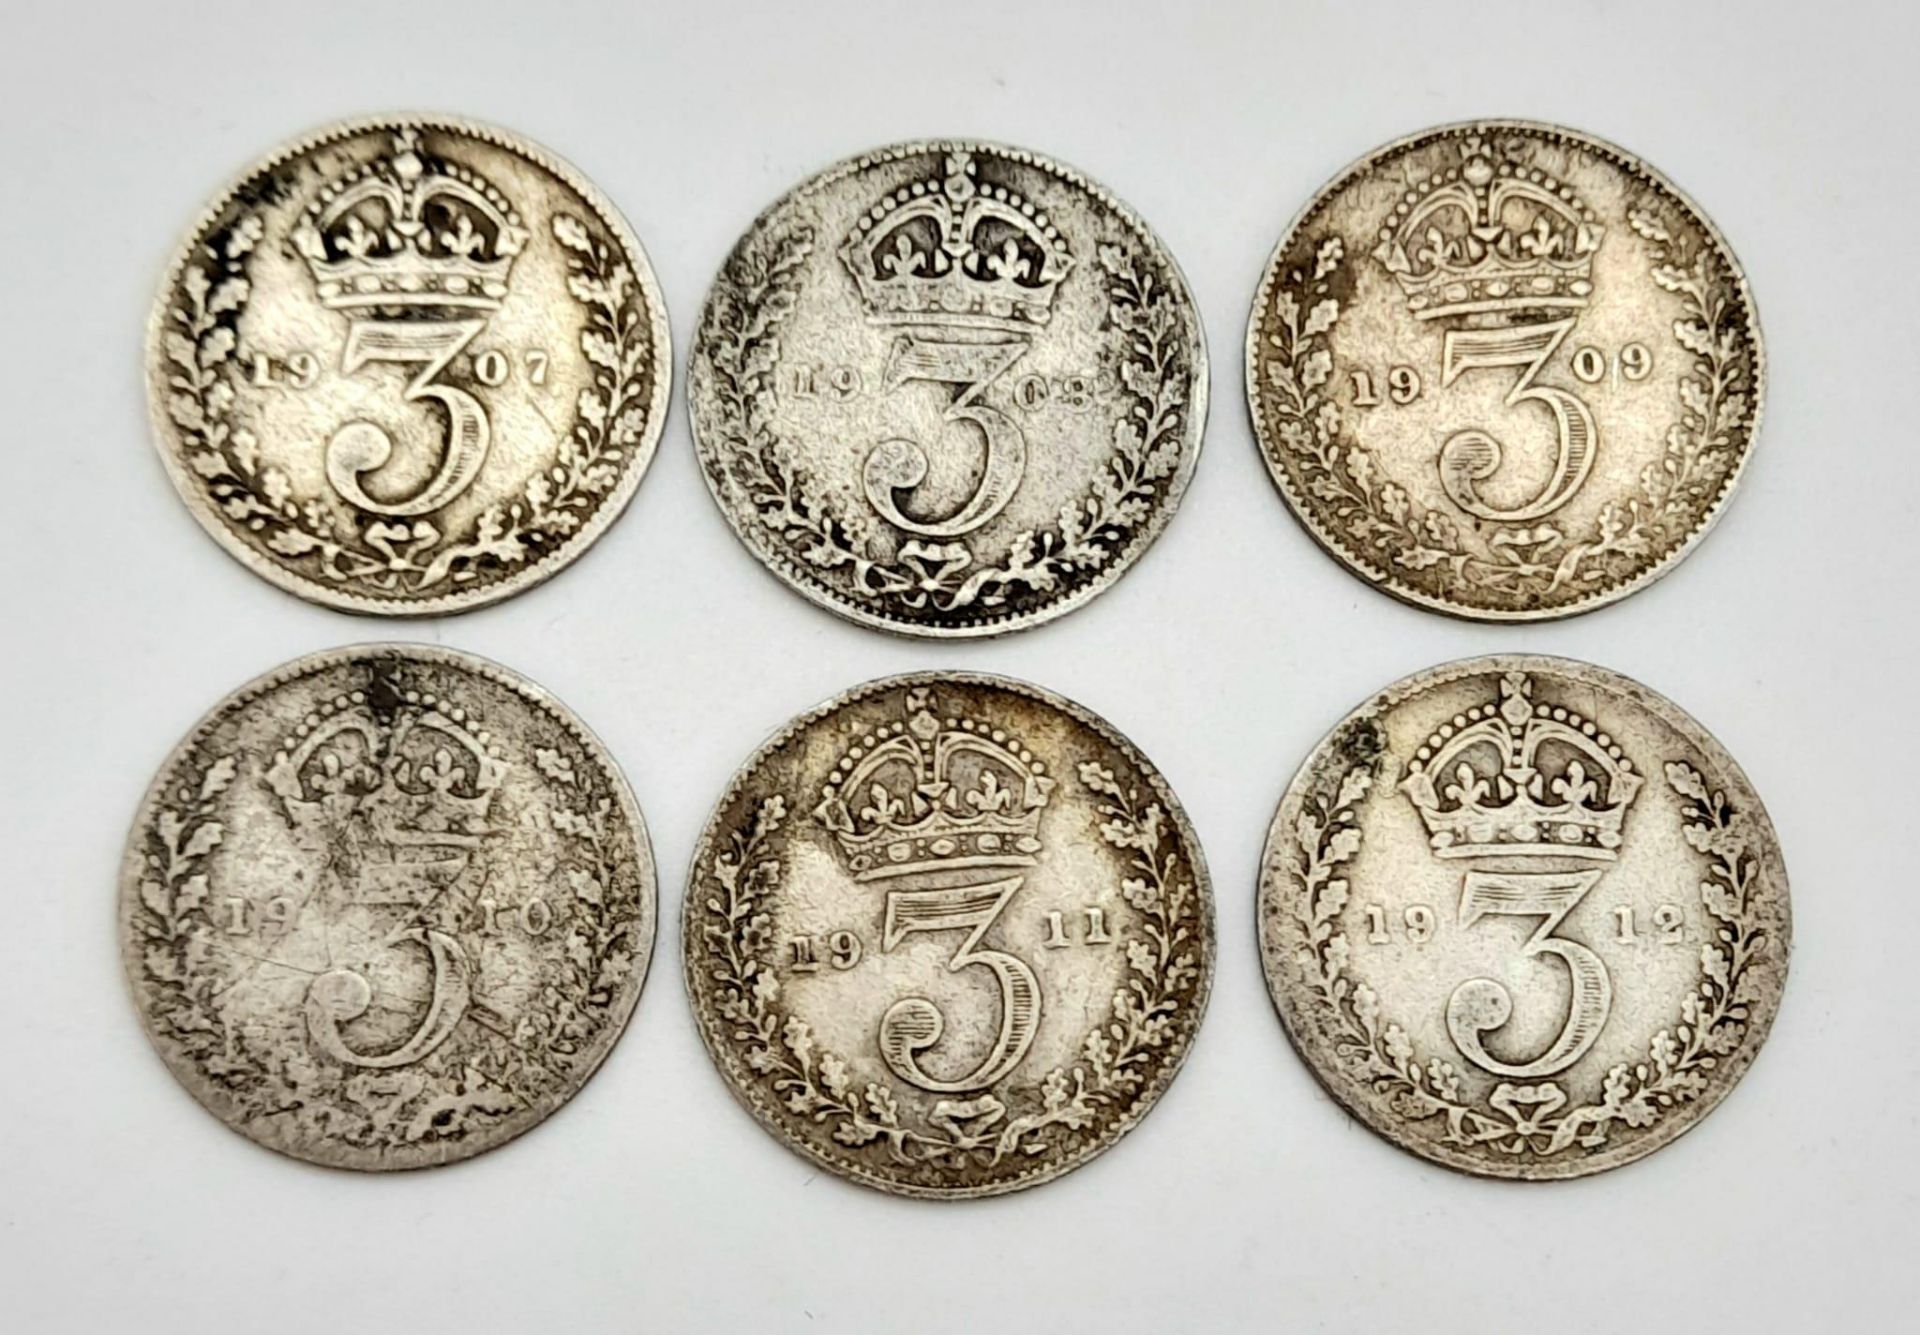 A Parcel of 6 (Pre-1920) Consecutive Run Dates Silver Three Penny’s from 1907 to 1912 Inclusive. 8.